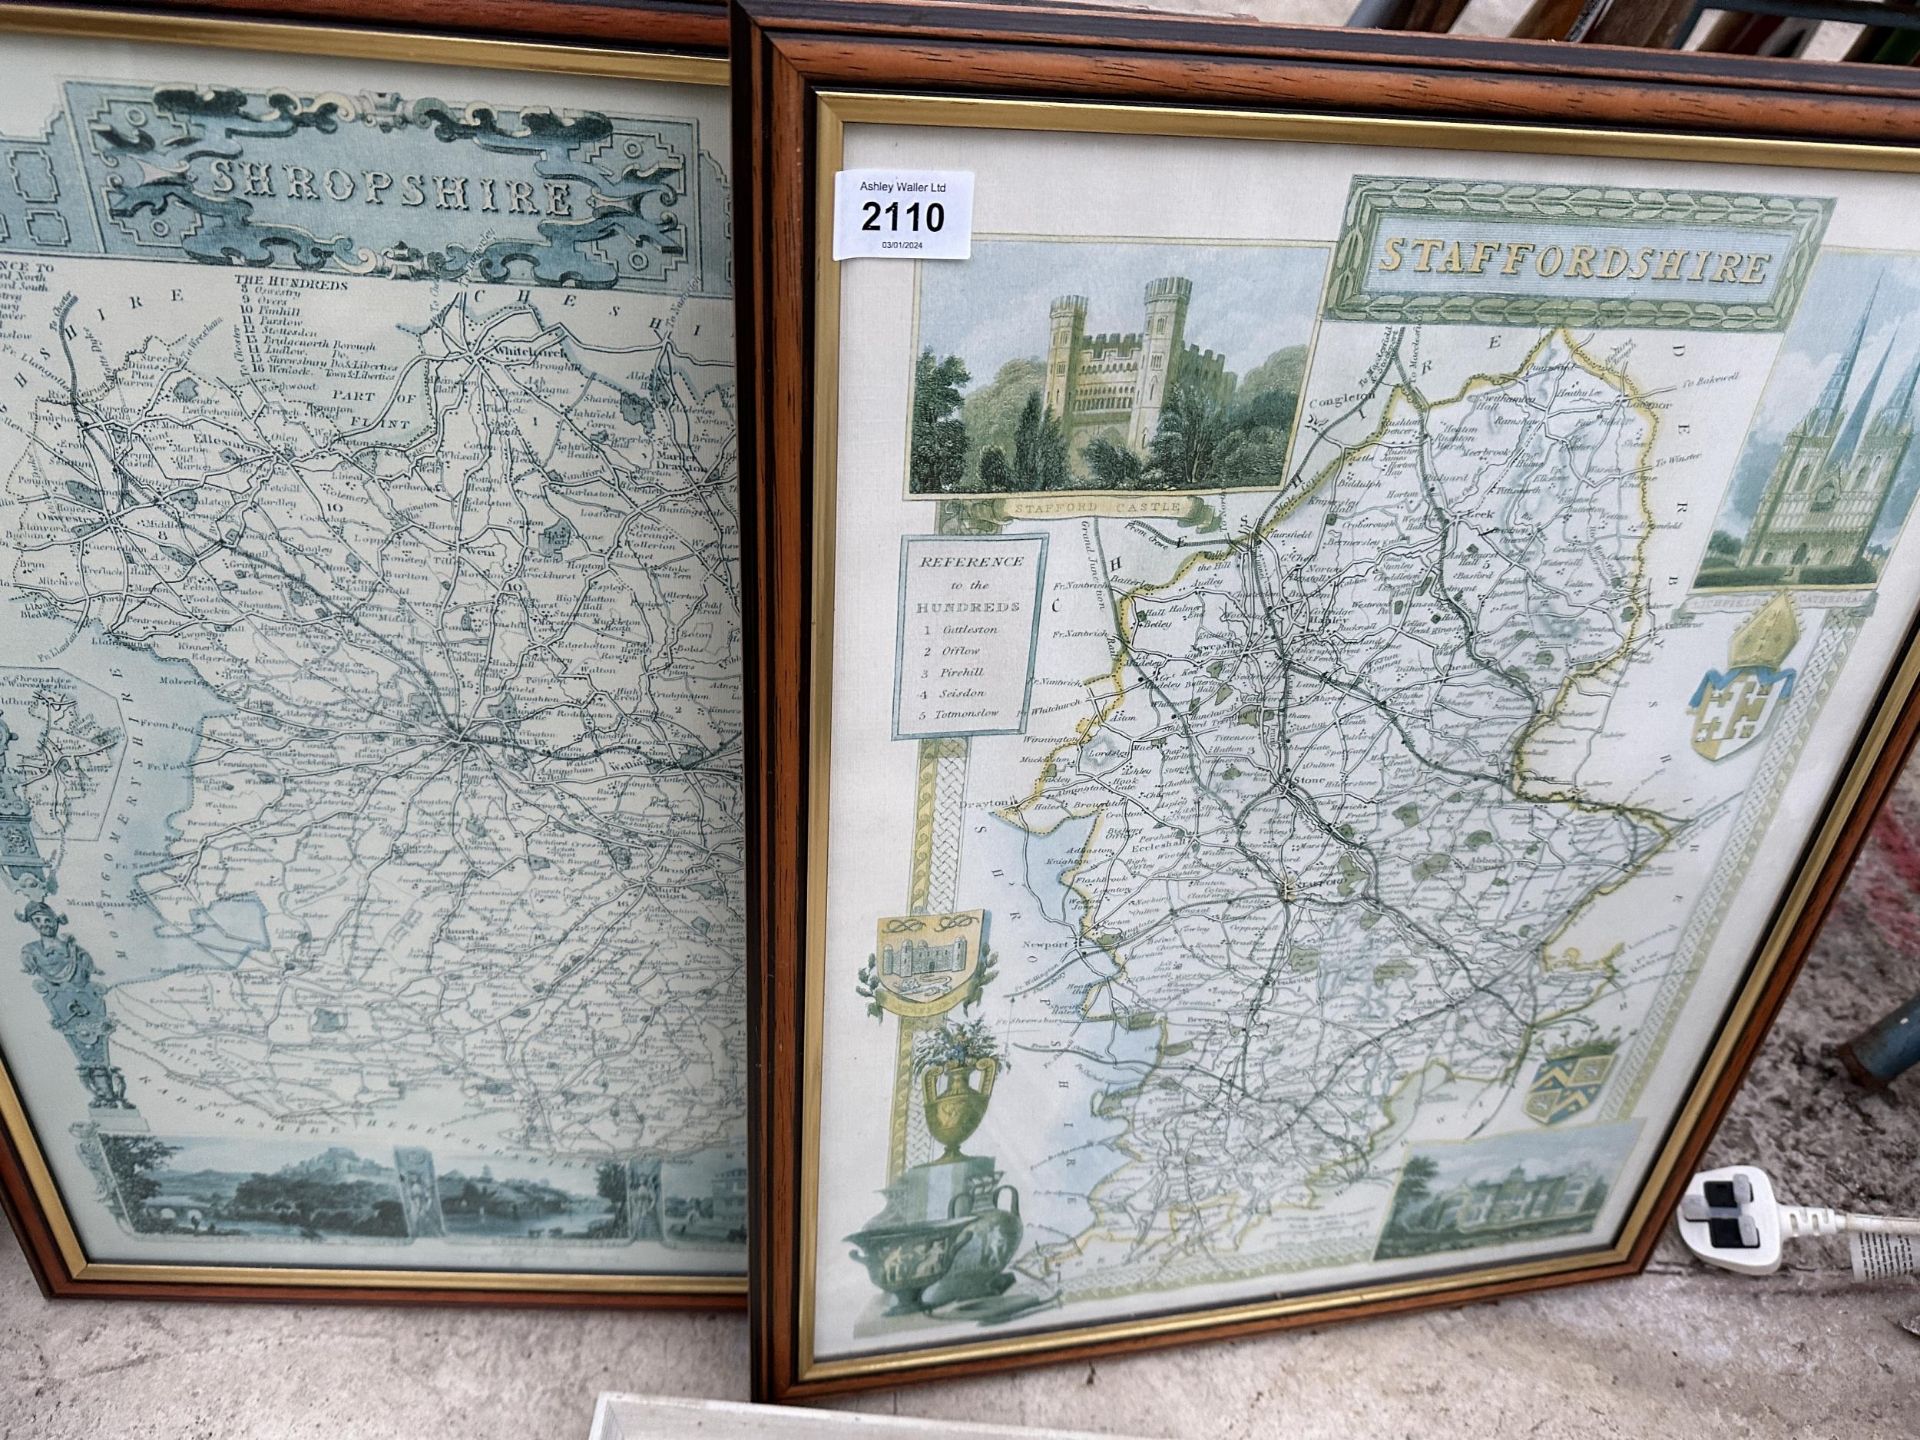 THREE FRAMED PRINTS TO INCLUDE A MAP OF STAFFORDSHIRE AND A MAP OF SHROPSHIRE ETC - Image 2 of 3